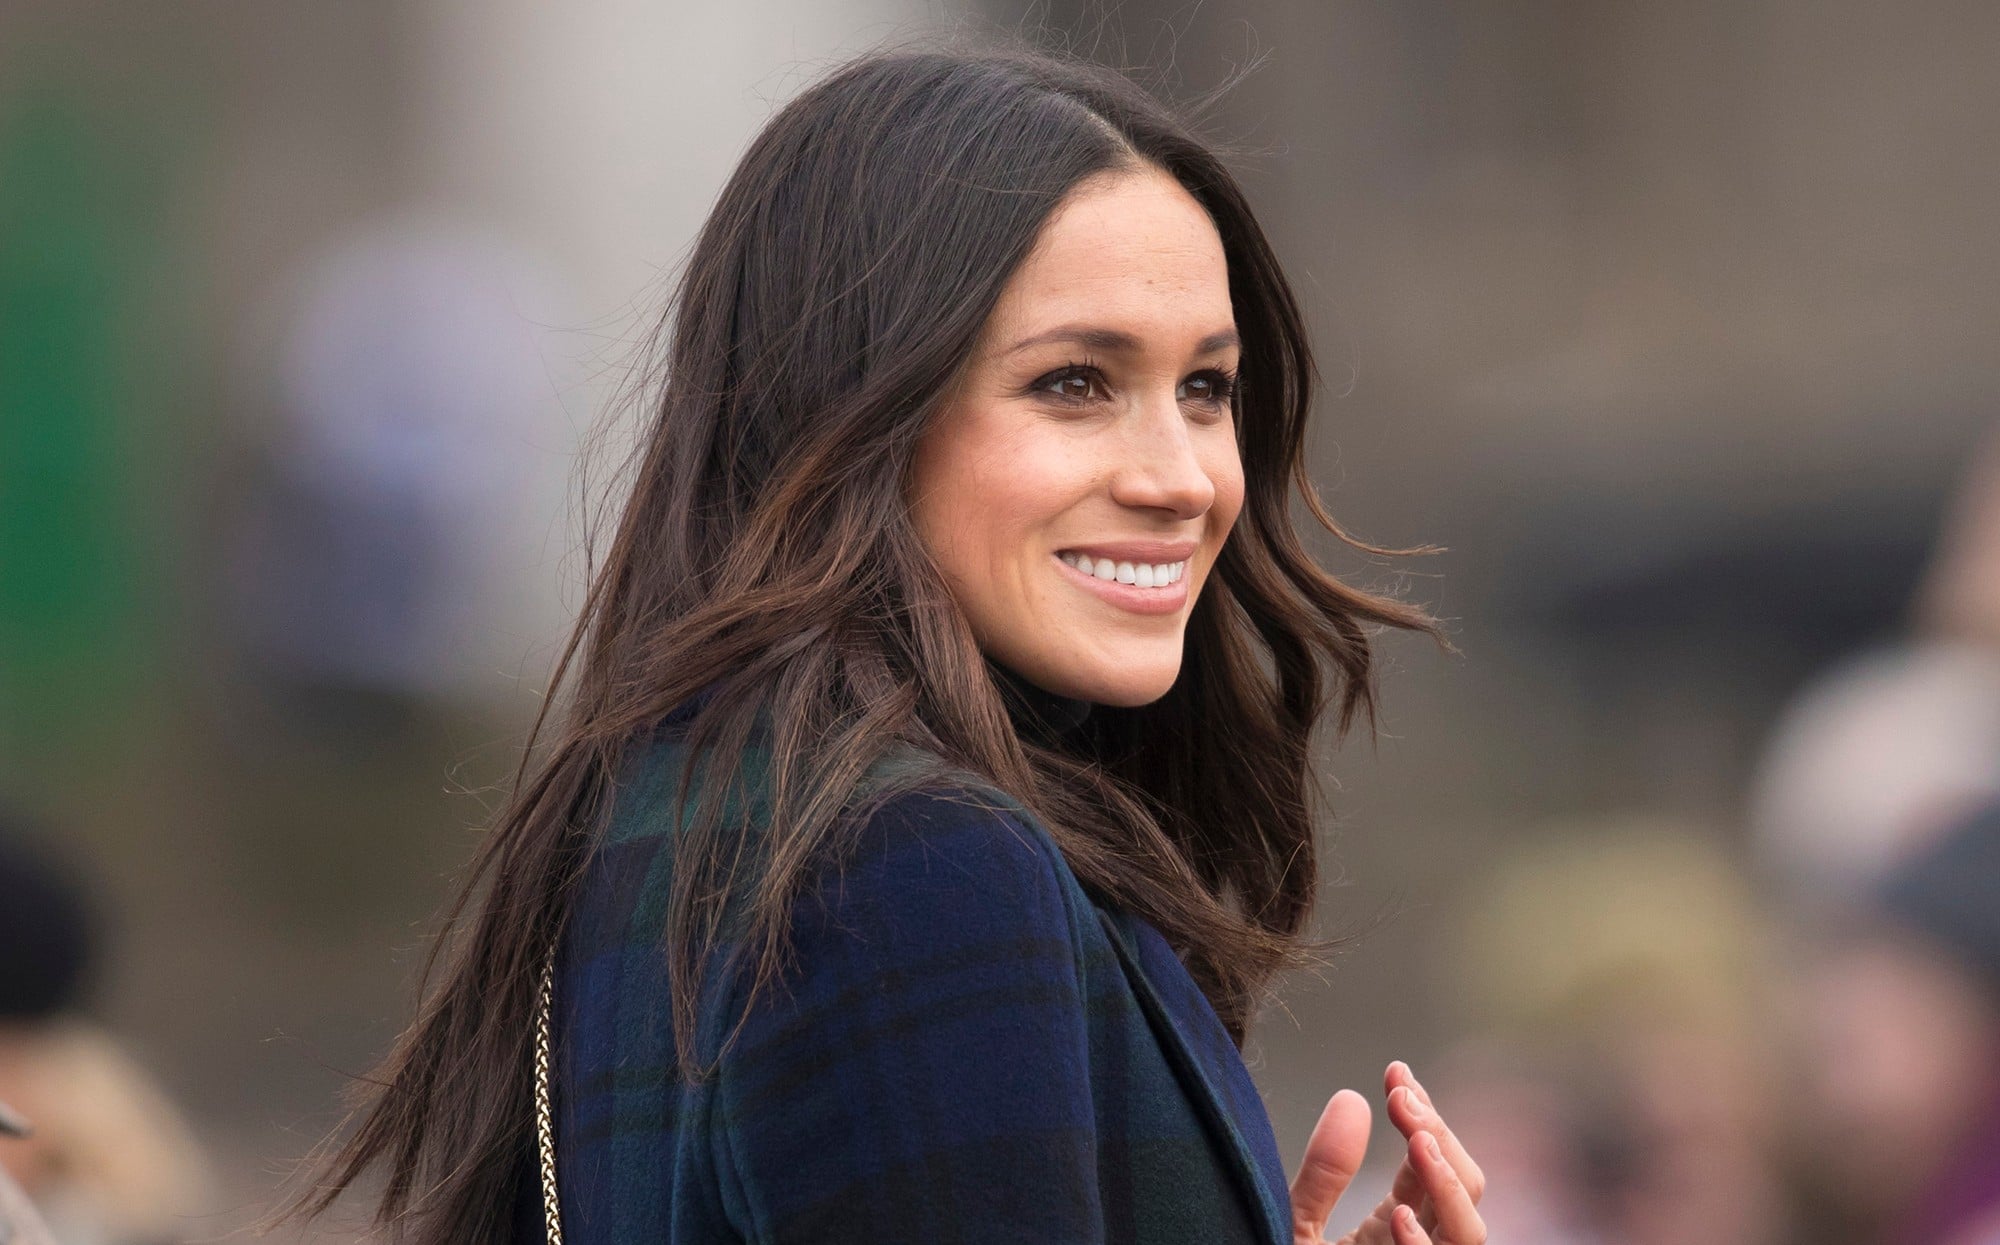 Want Meghan Markle's Strathberry Bag? The Waiting List Has Topped 1,000  People